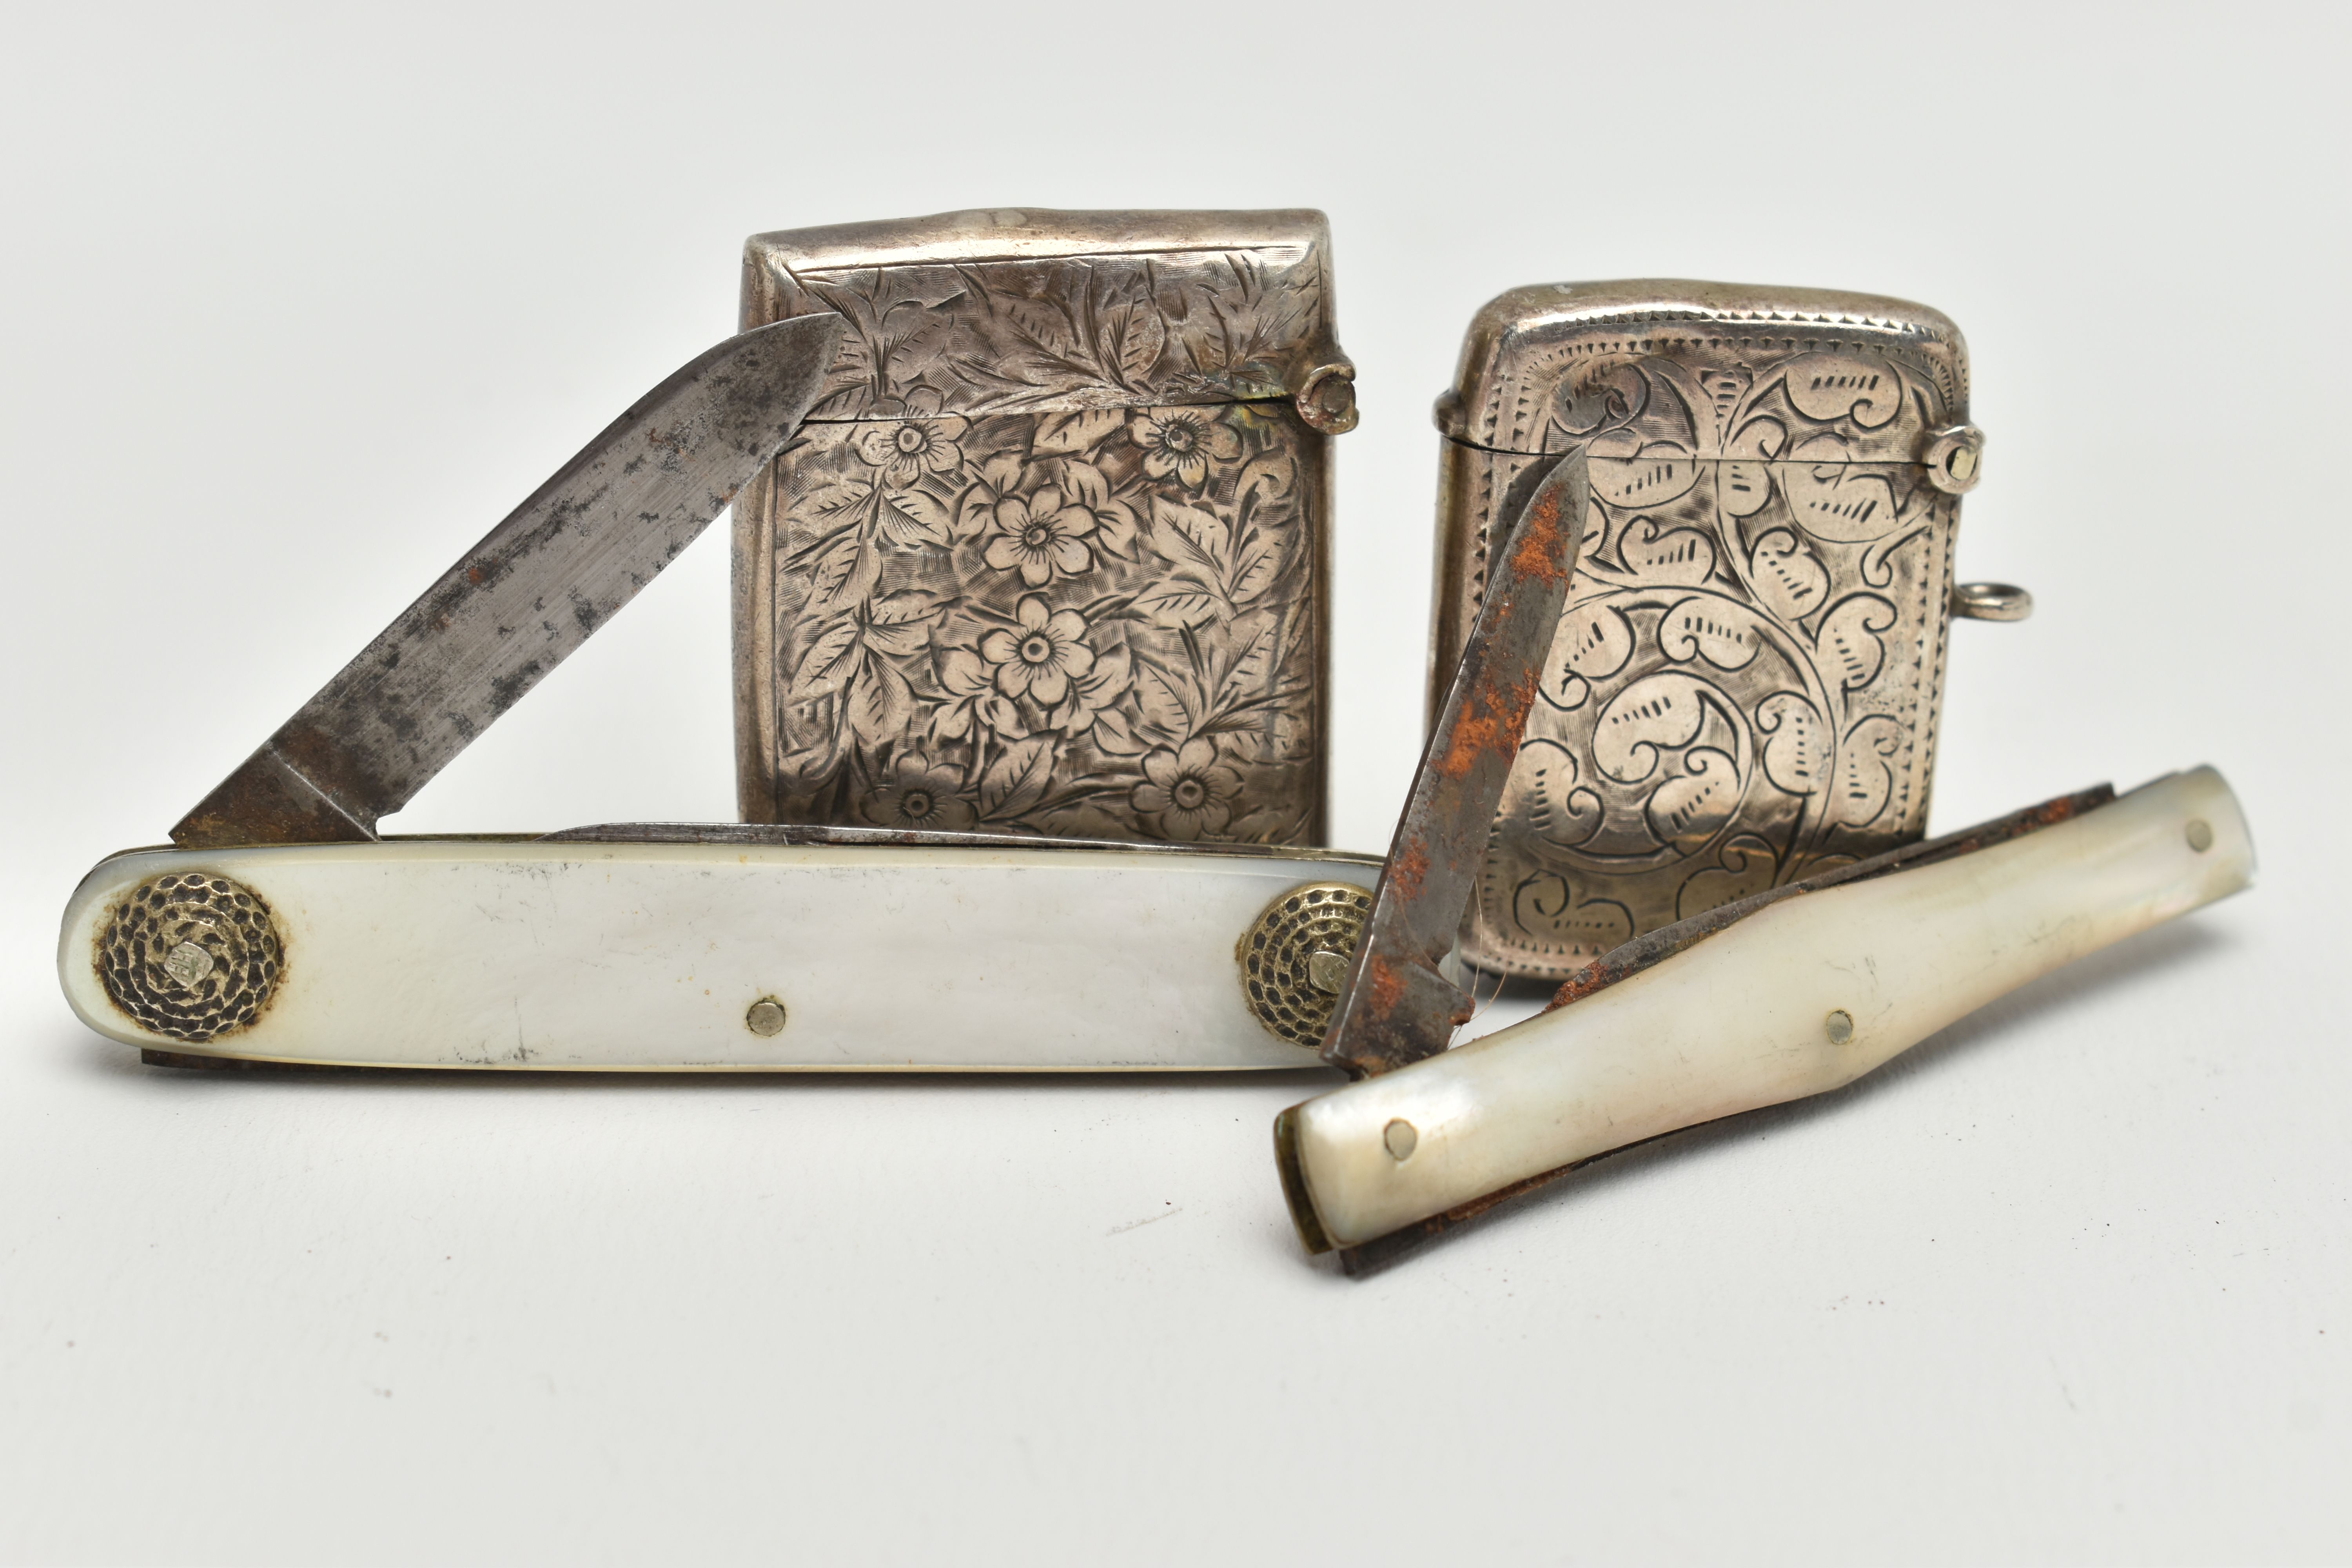 TWO SILVER VESTAS AND TWO MOTHER OF PEARL FRUIT KNIVES, both vestas etched with foliage detail, both - Image 3 of 4